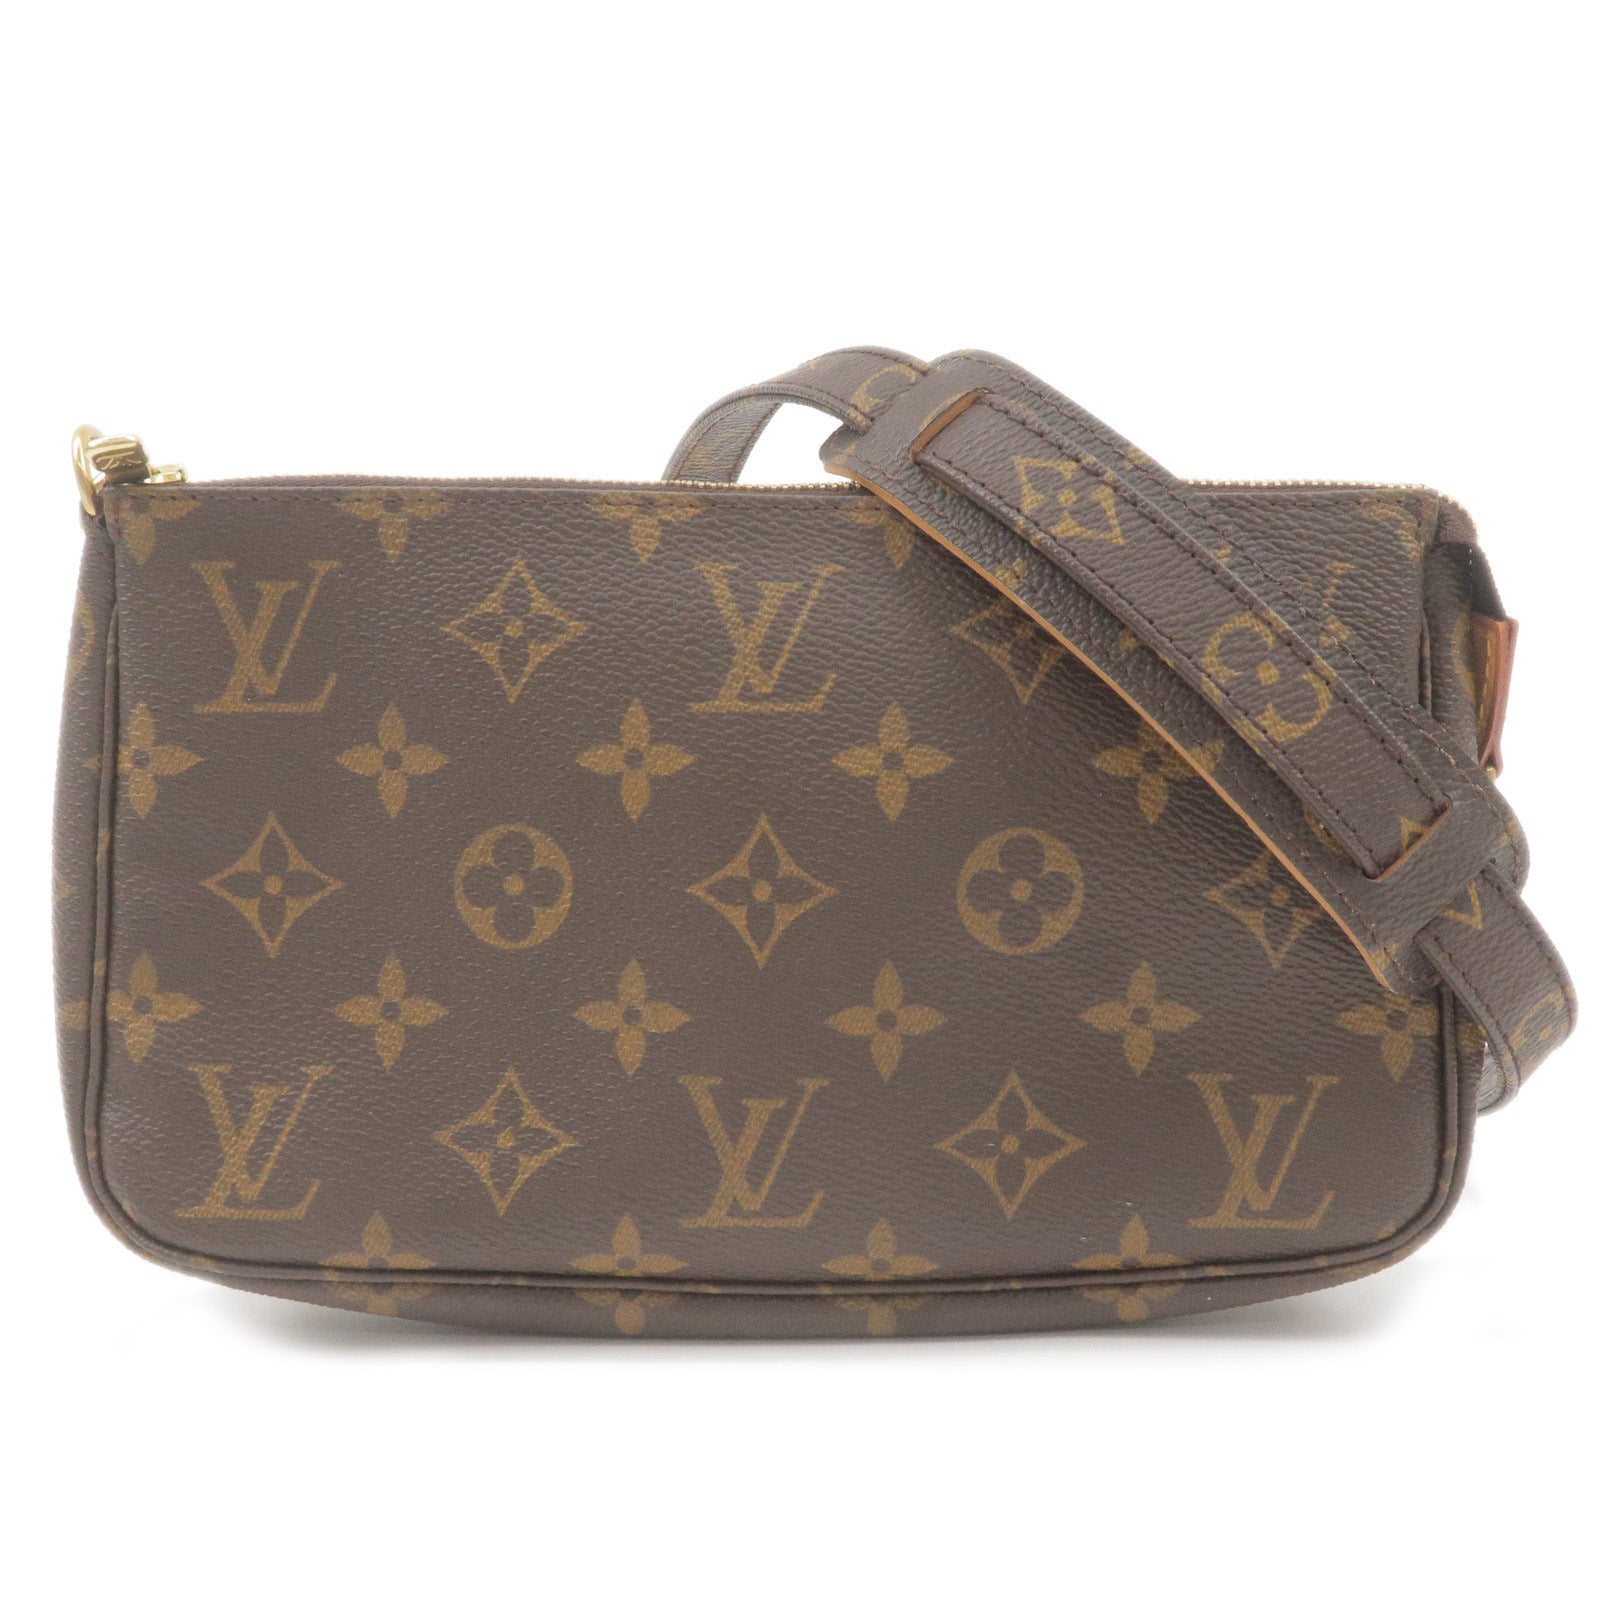 Louis Vuitton Pochette with shoulder strap and crossbody.